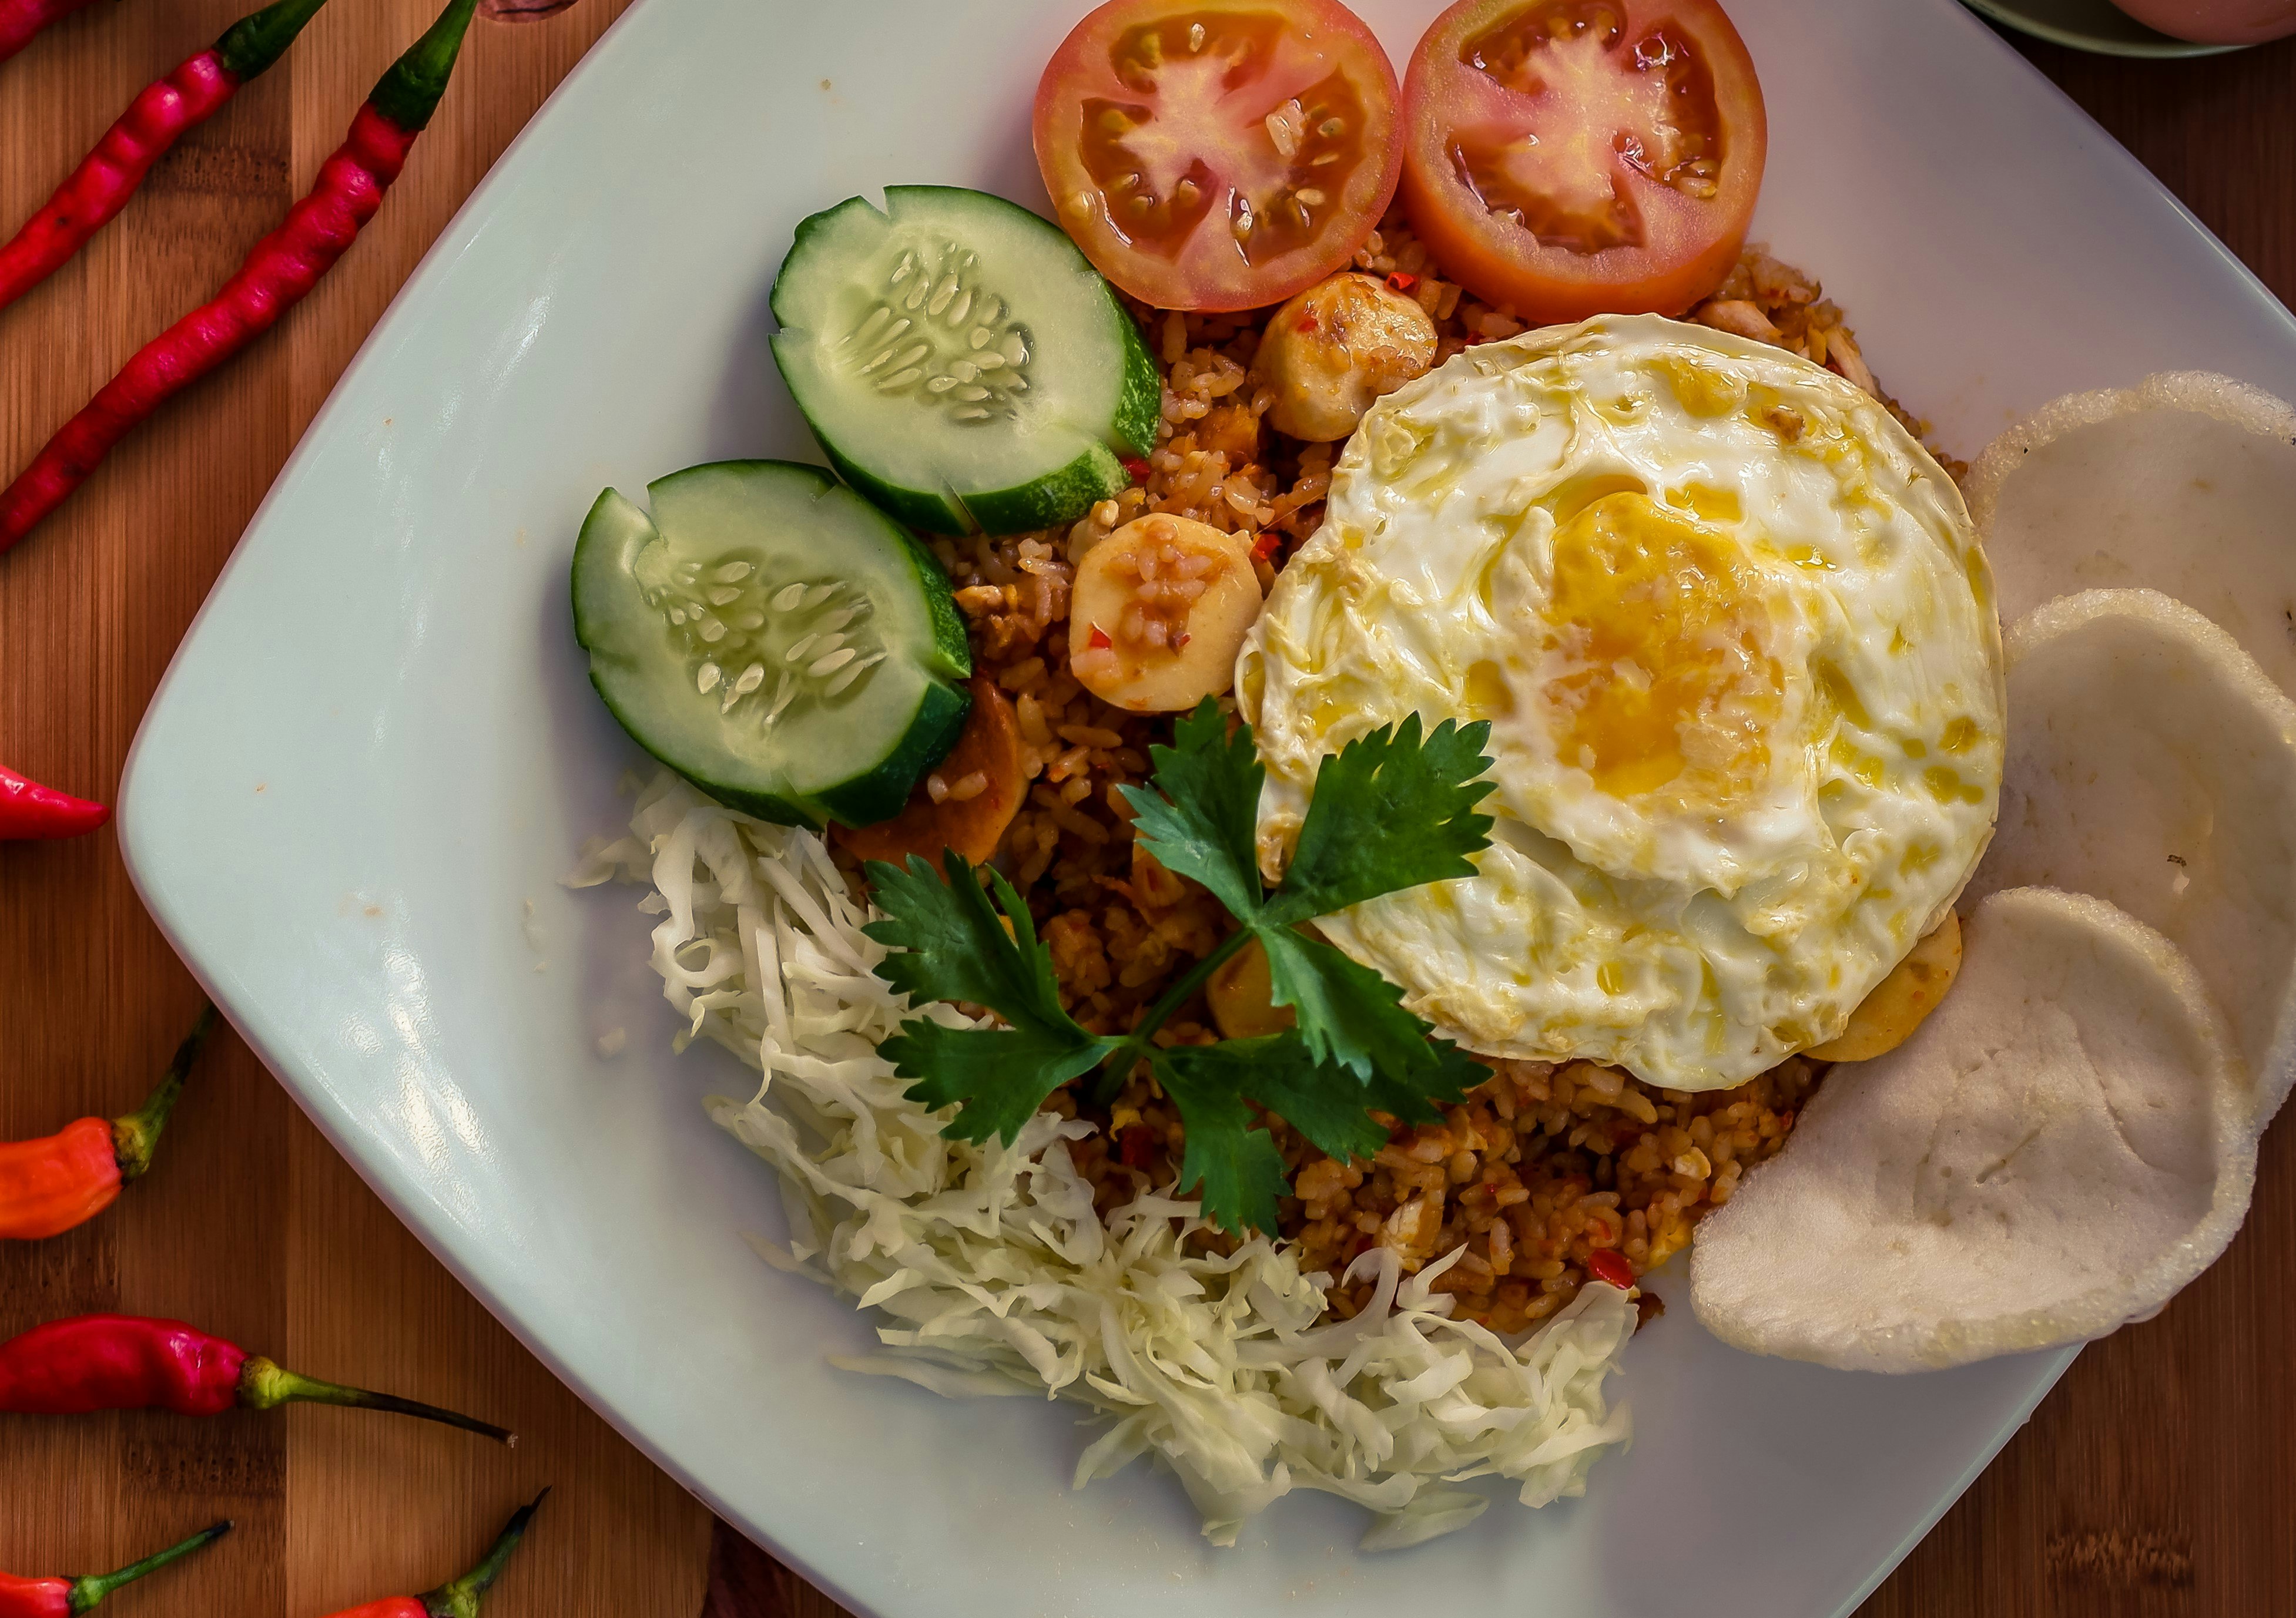 A top-down view of a plate of nasi goreng on a tabletop. The dish consists of rice and vegetables, with a fried egg placed on top.